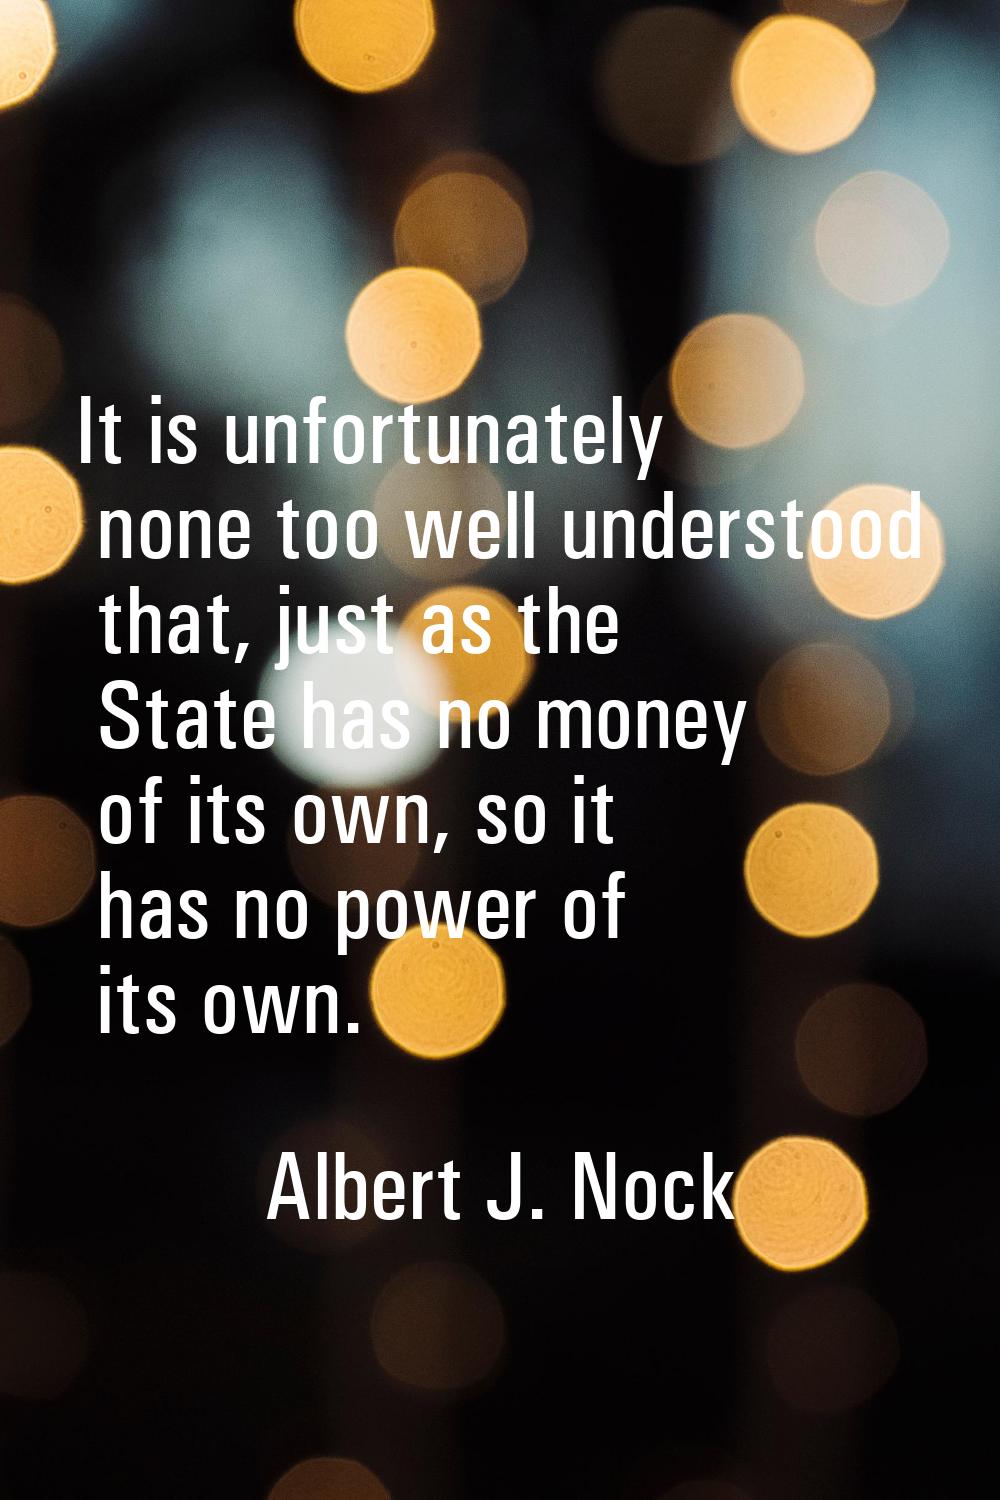 It is unfortunately none too well understood that, just as the State has no money of its own, so it